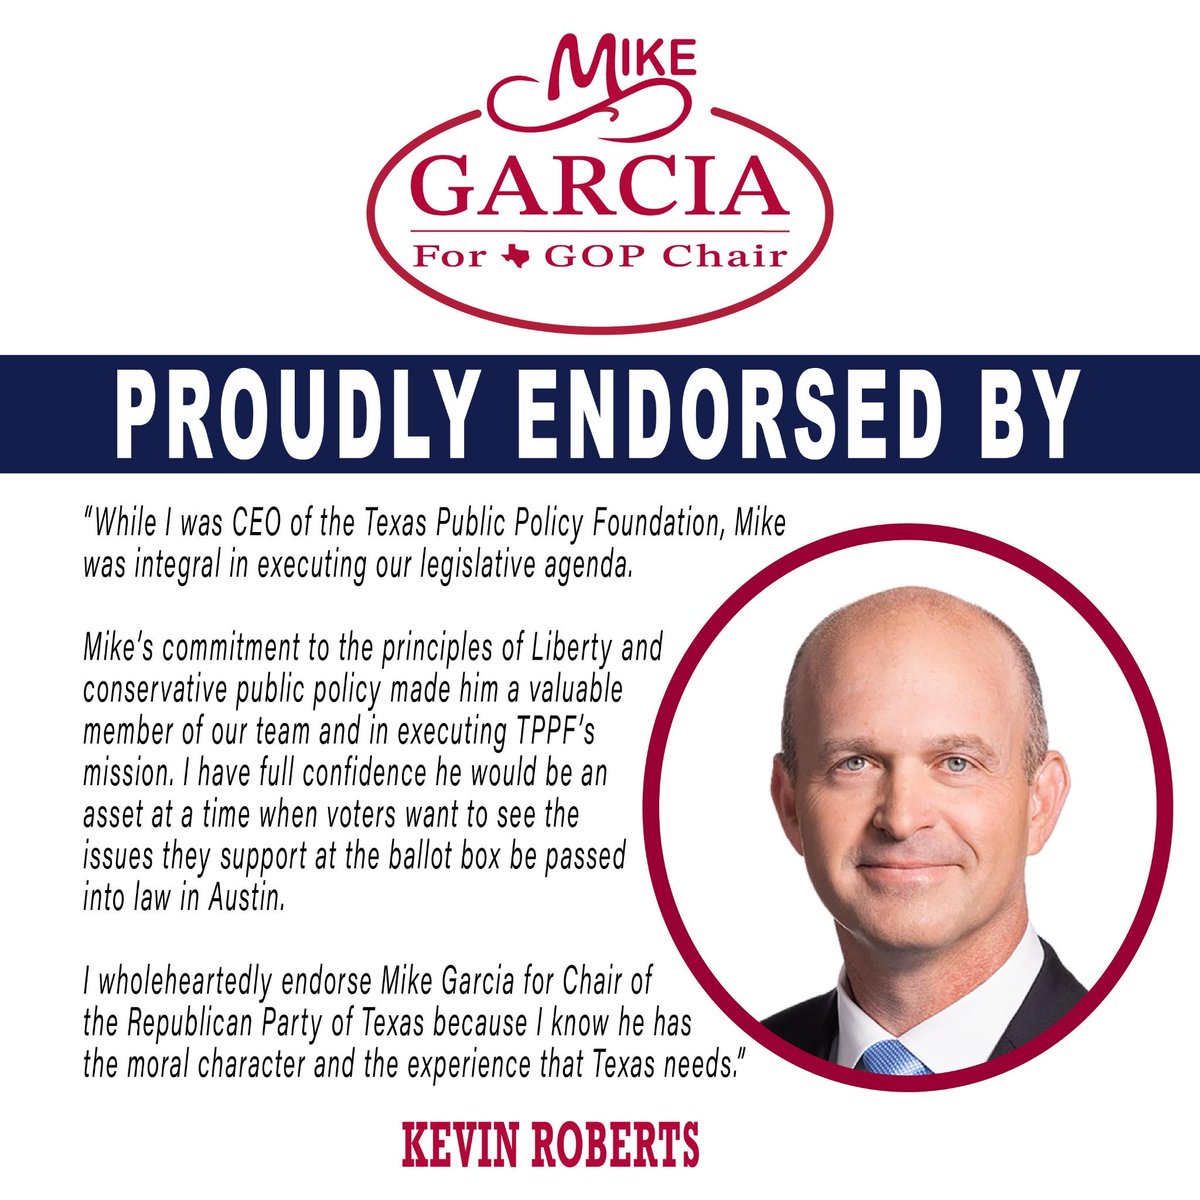 Honored to have the support of @KevinRobertsTX, my former boss and mentor for many years. His example in leading the conservative movement and especially always putting God first has been a model, and one I intend to continue at the @TexasGOP.